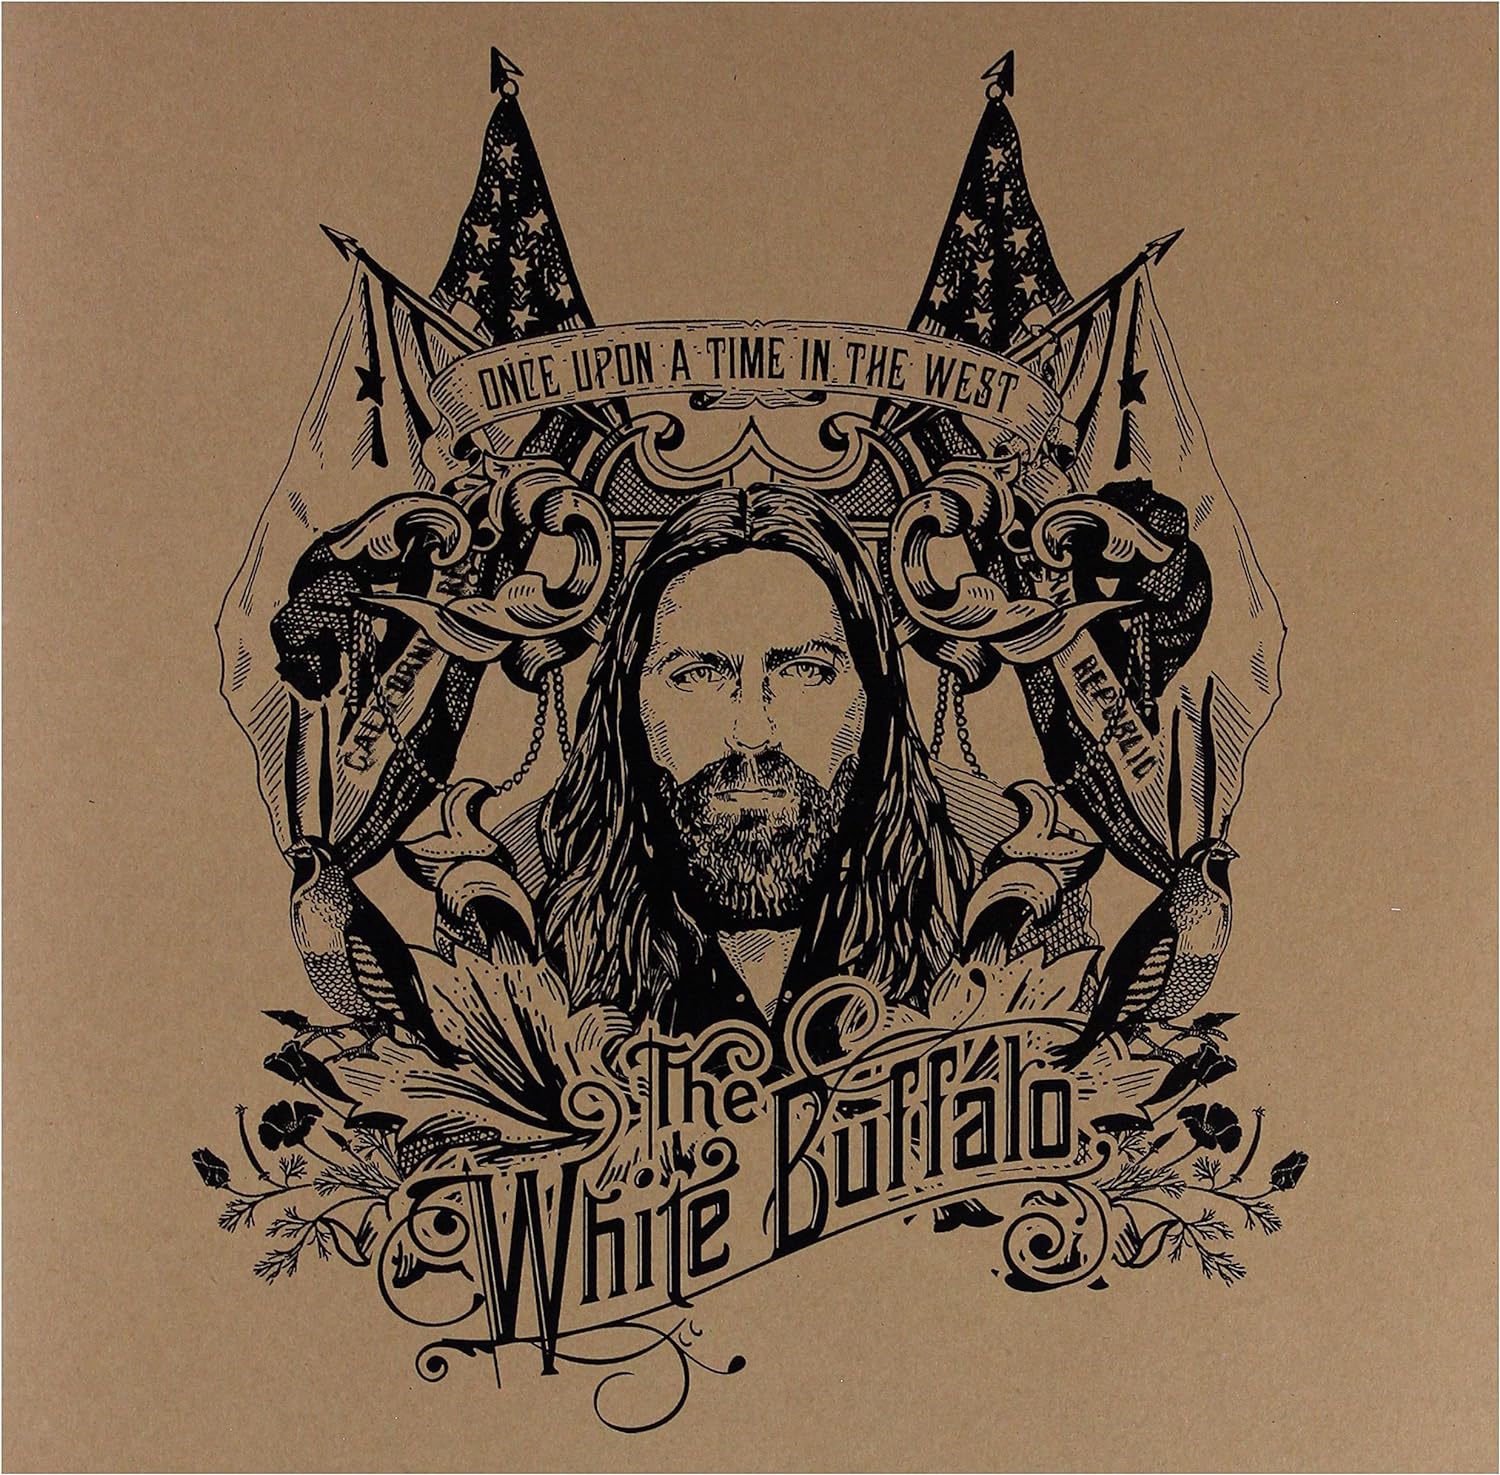 The White Buffalo "Once Upon A Time In The West" Vinyl